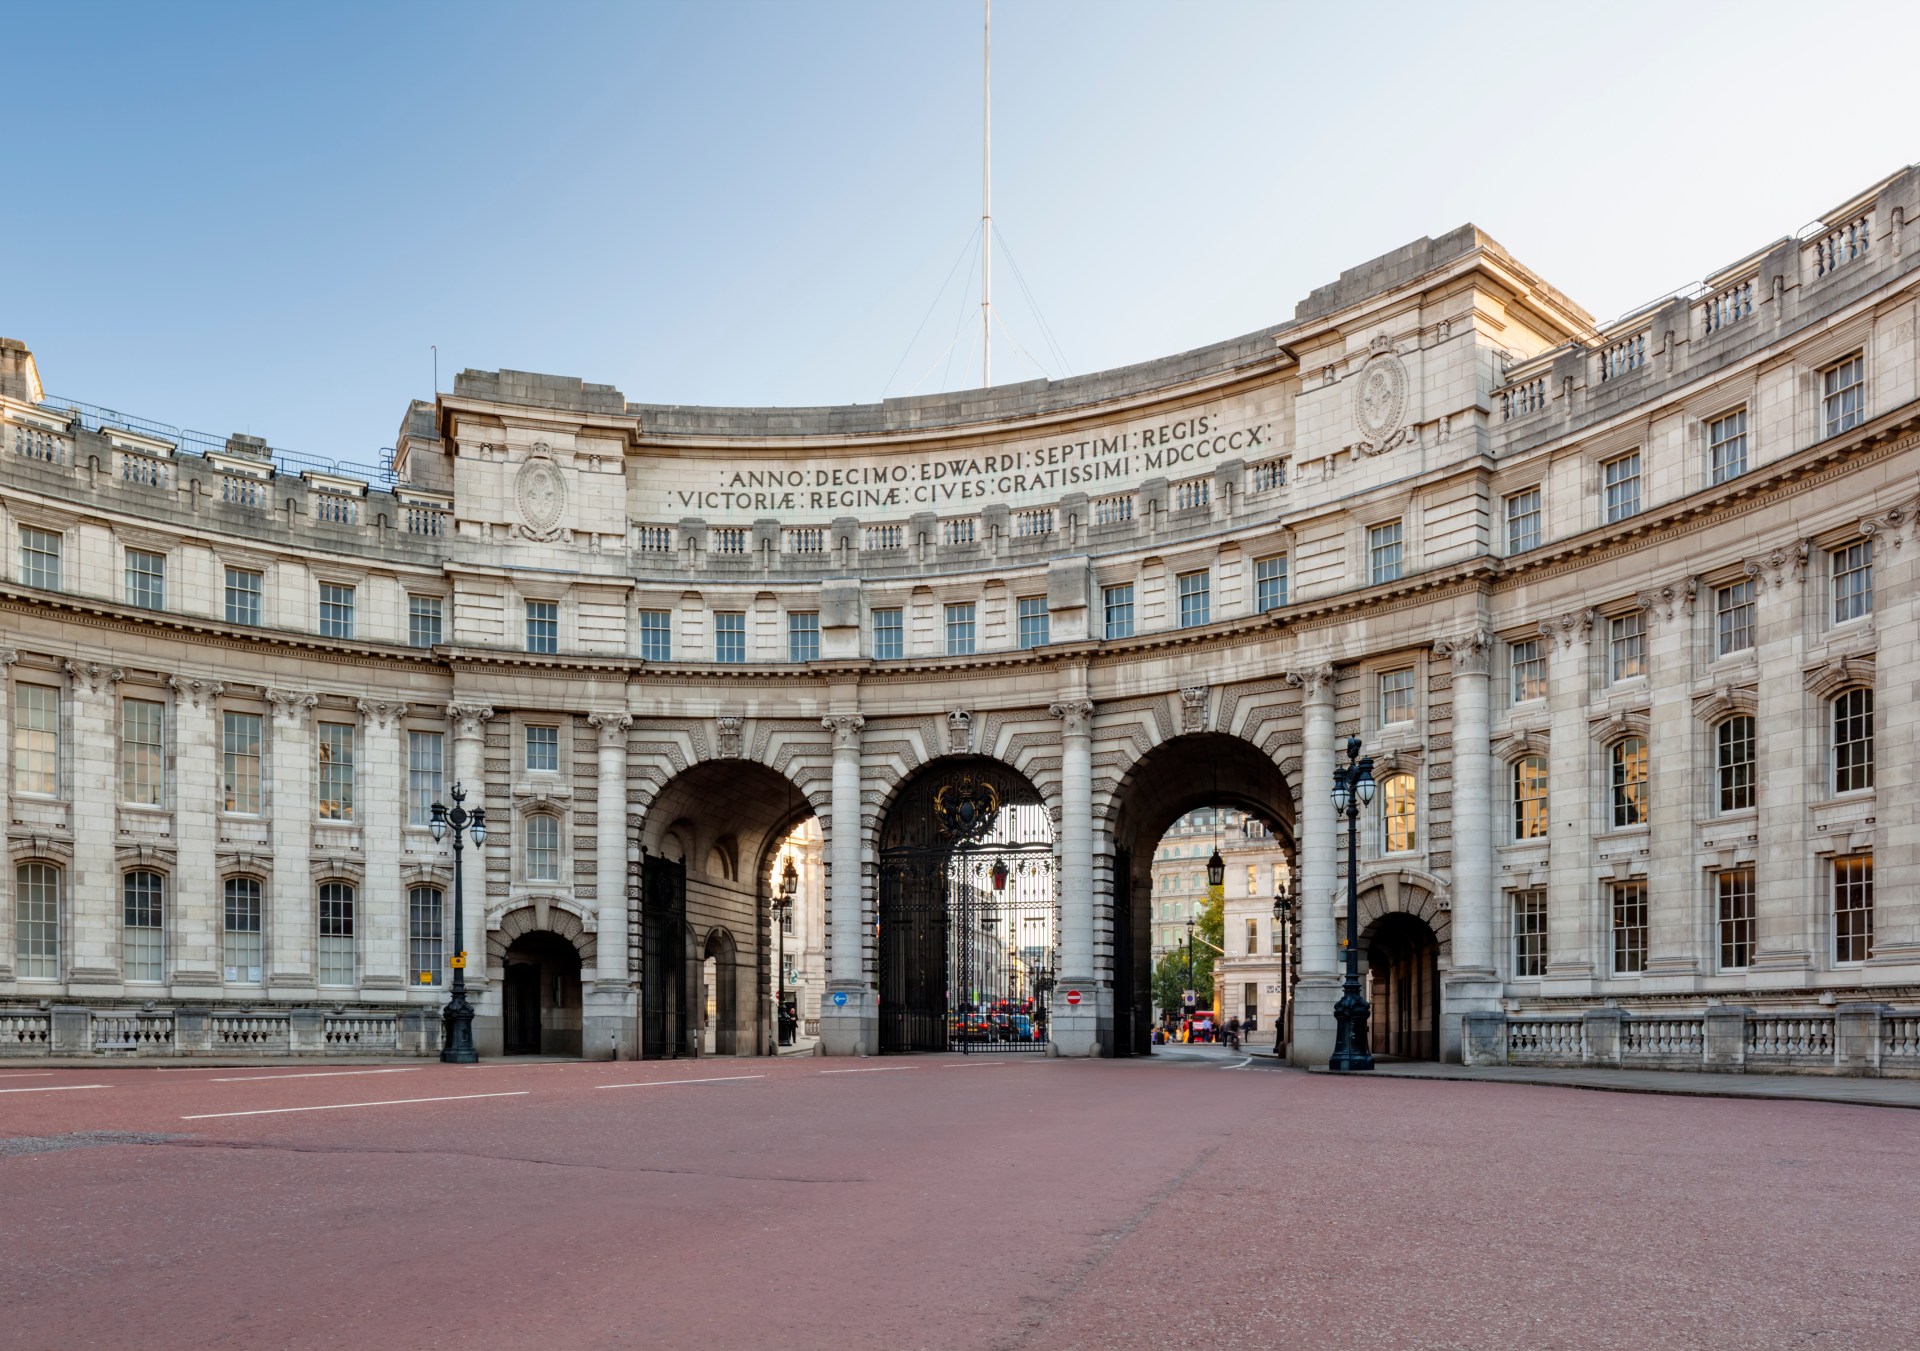 Admiralty Arch at sunrise - London, UK